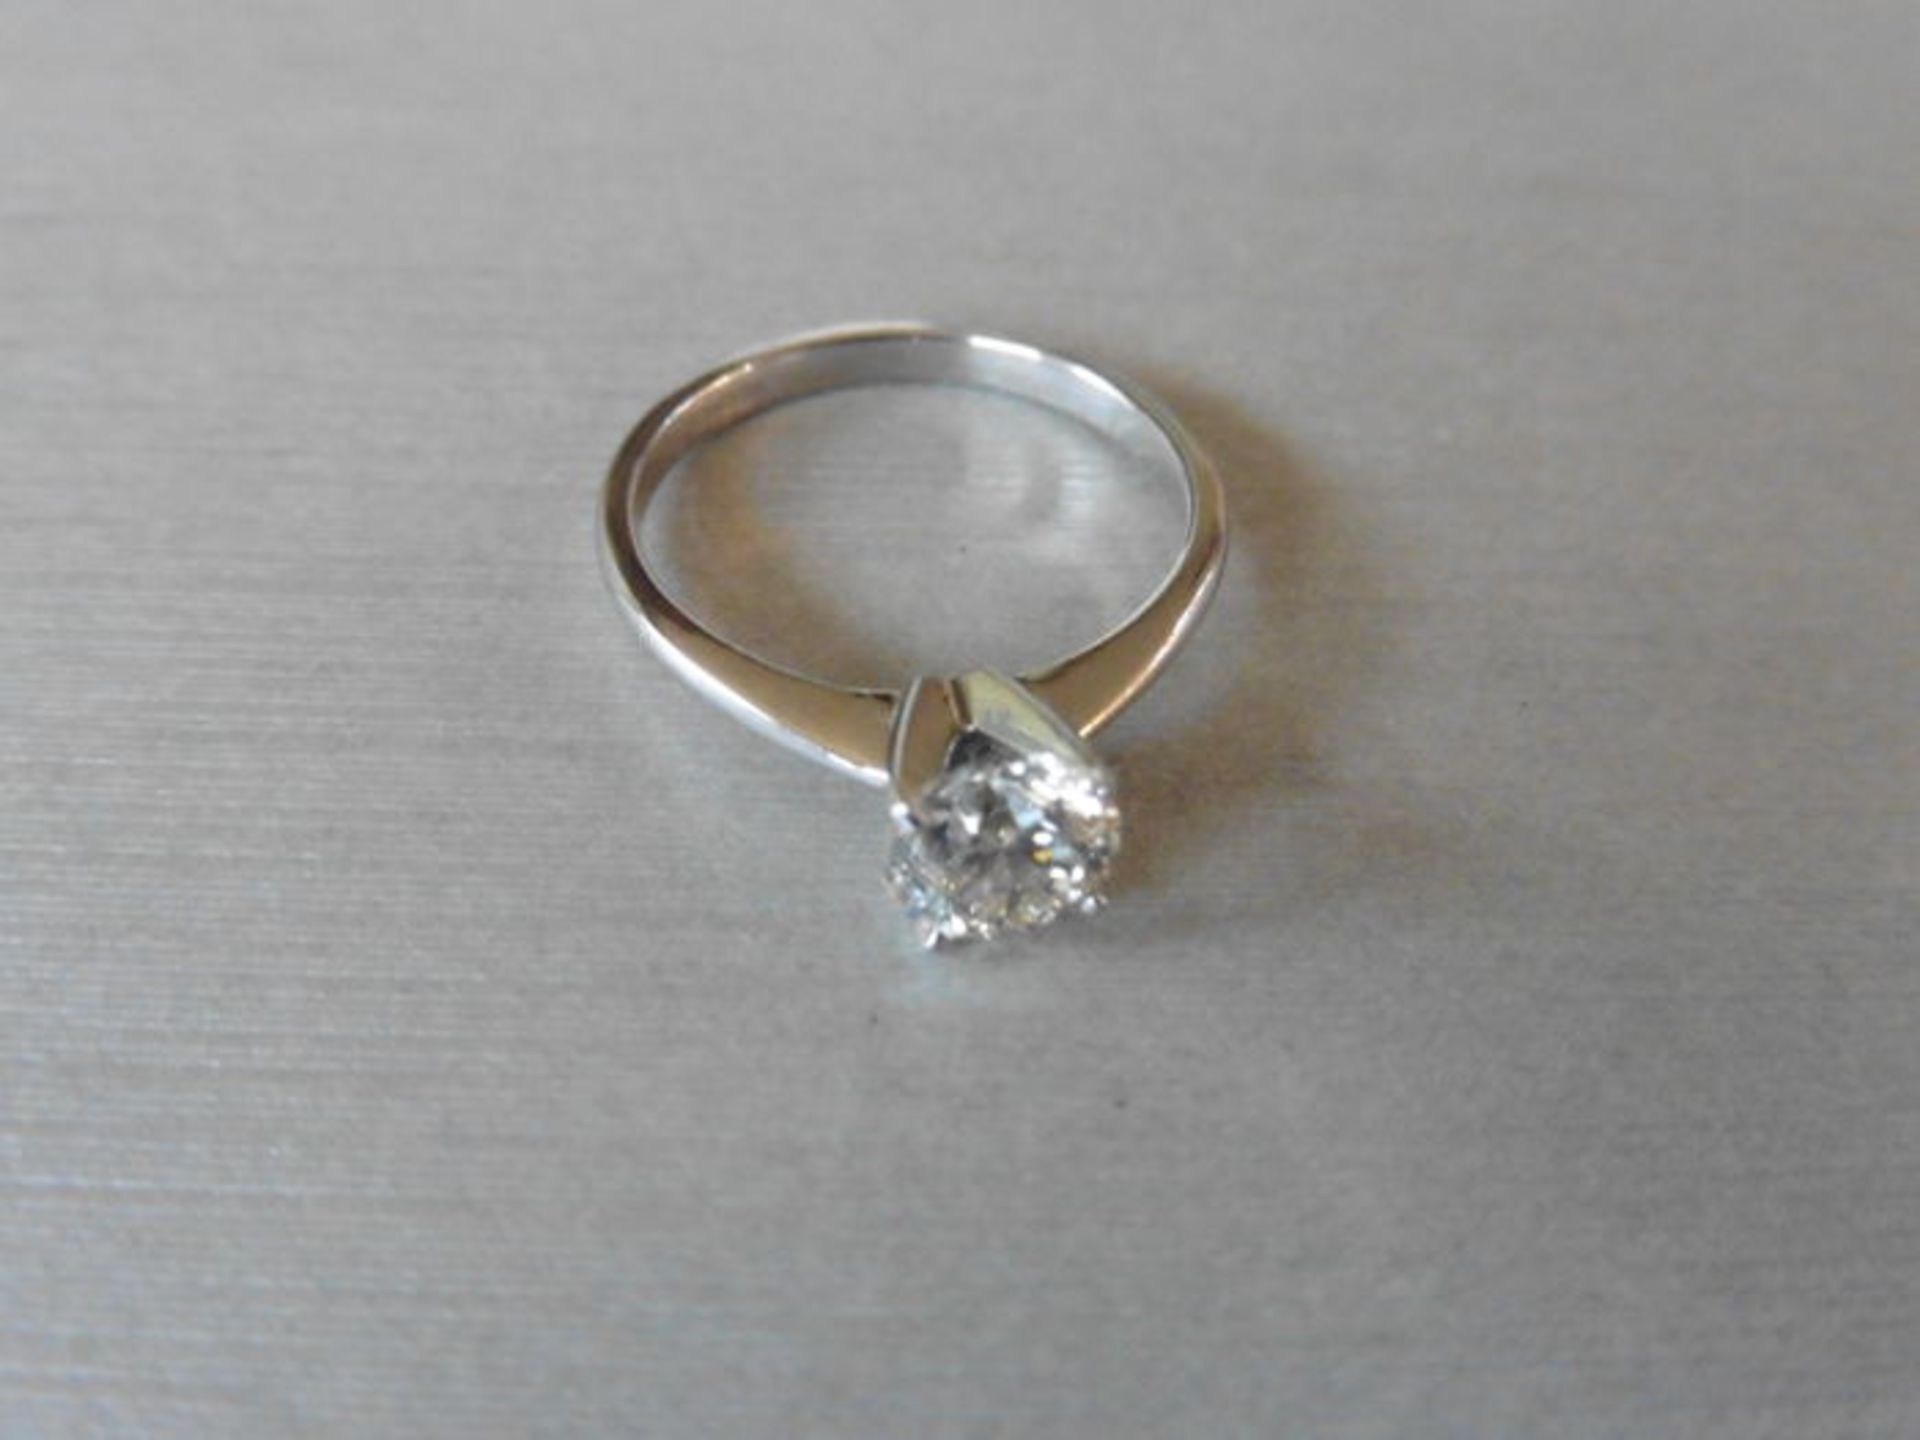 1.00ct diamond solitaire ring set in platinum. H colour and I1 clarity. 4 claw setting, size M. - Bild 2 aus 3